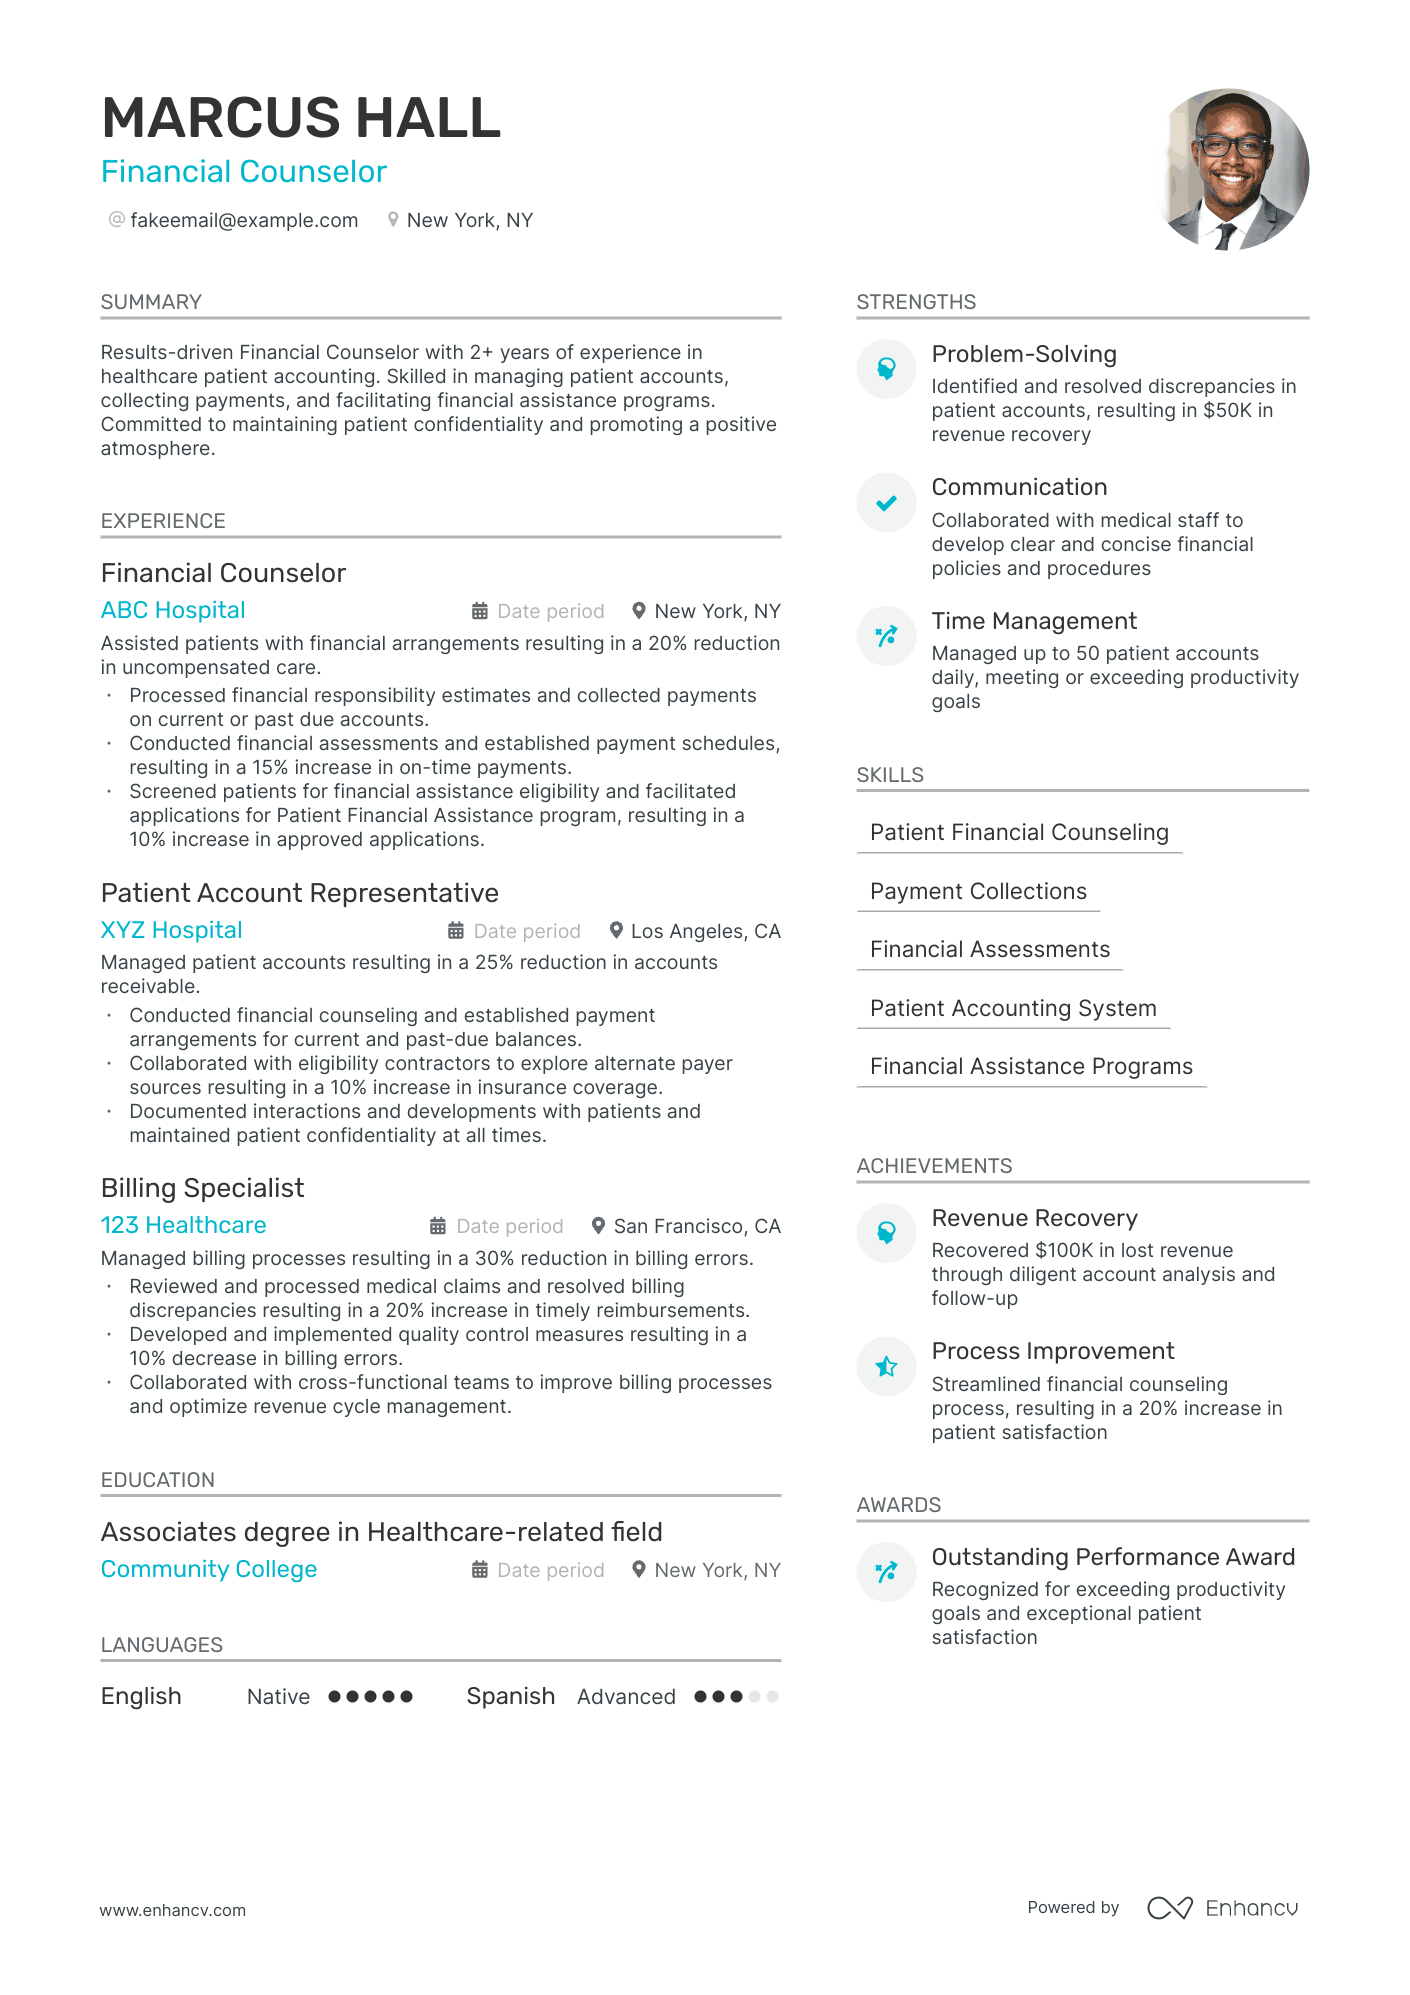 Financial Counselor resume example